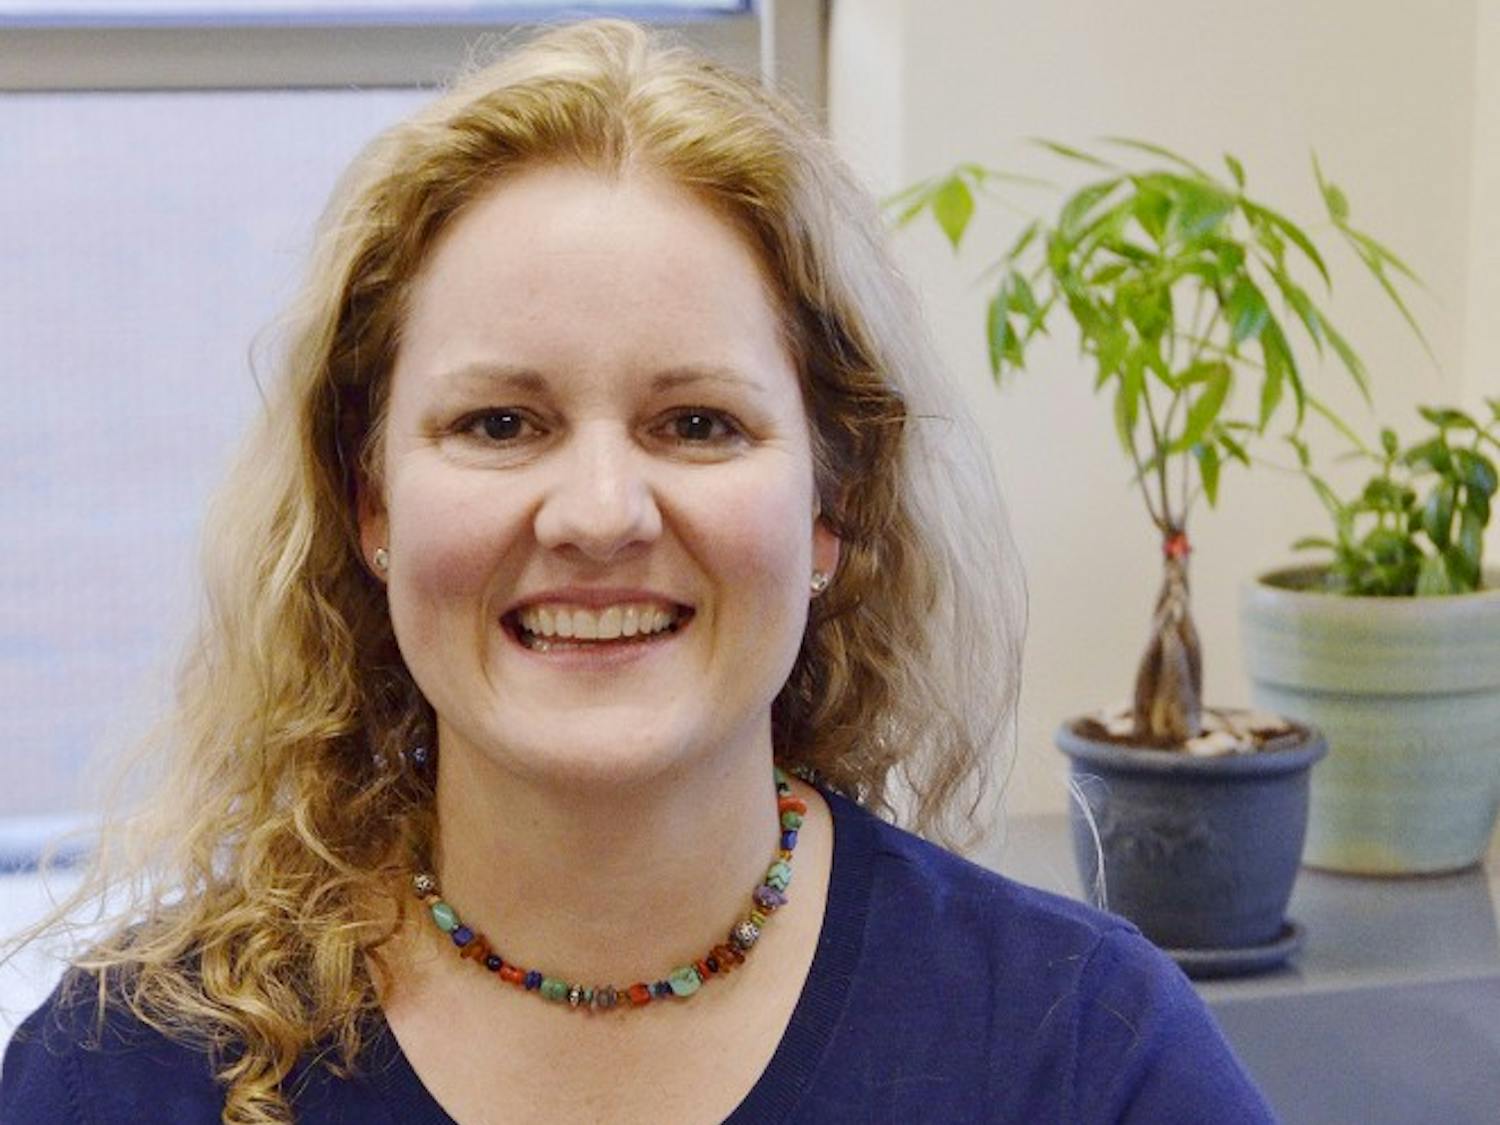 	UNC professor Rebecca Macy, a former social worker, teaches now in the UNC School of Social Work. Macy also conducts research on domestic violence, sexual assault and human trafficking.